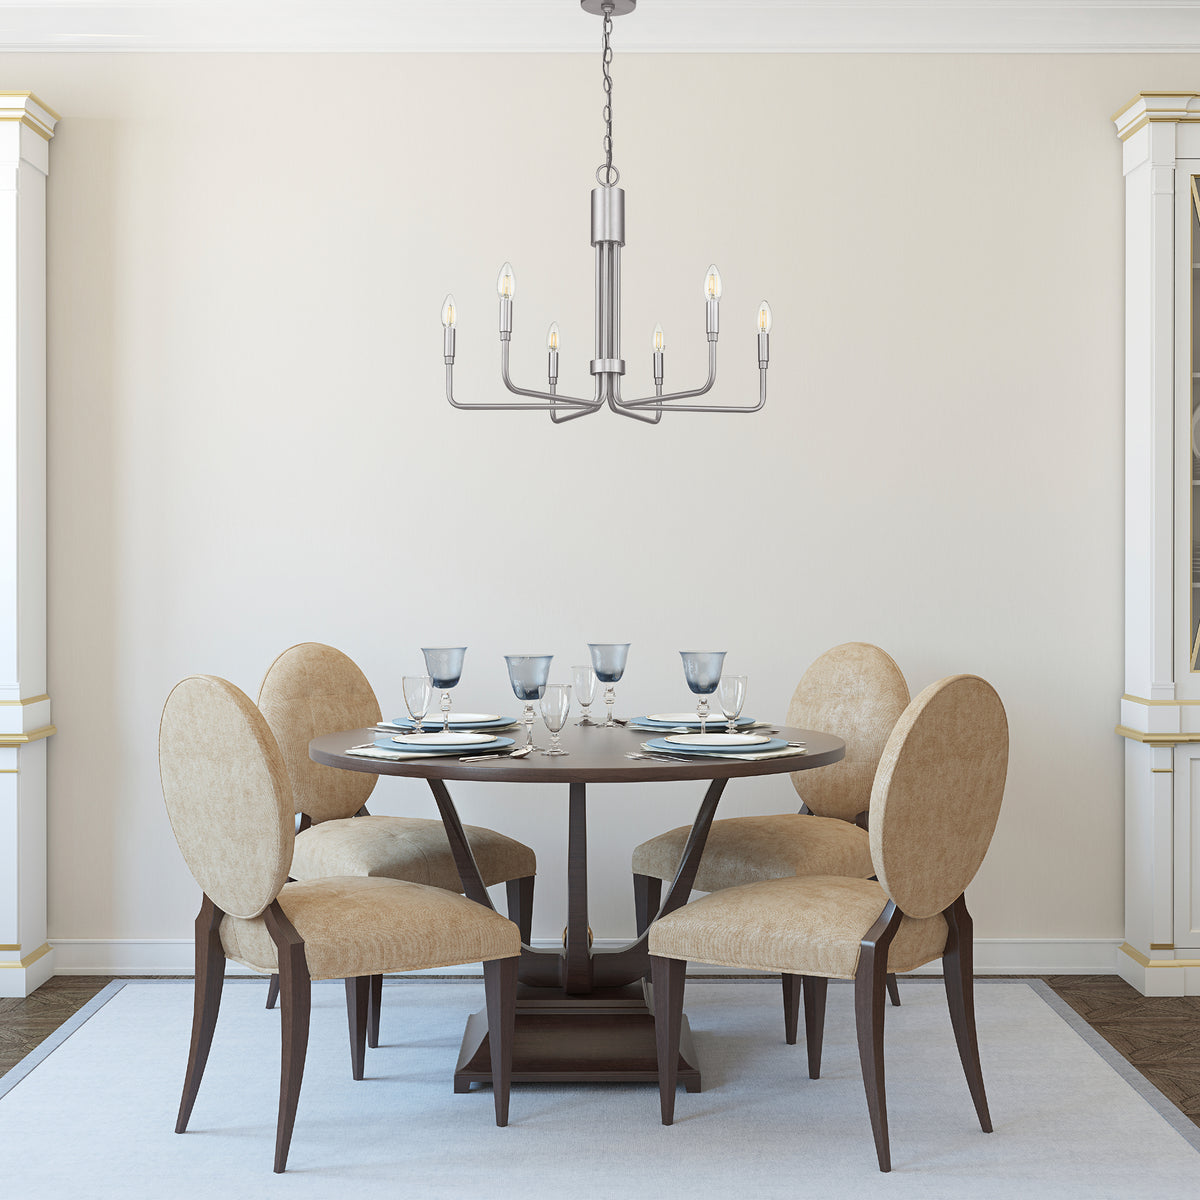 nickel chandelier over dining table traditional